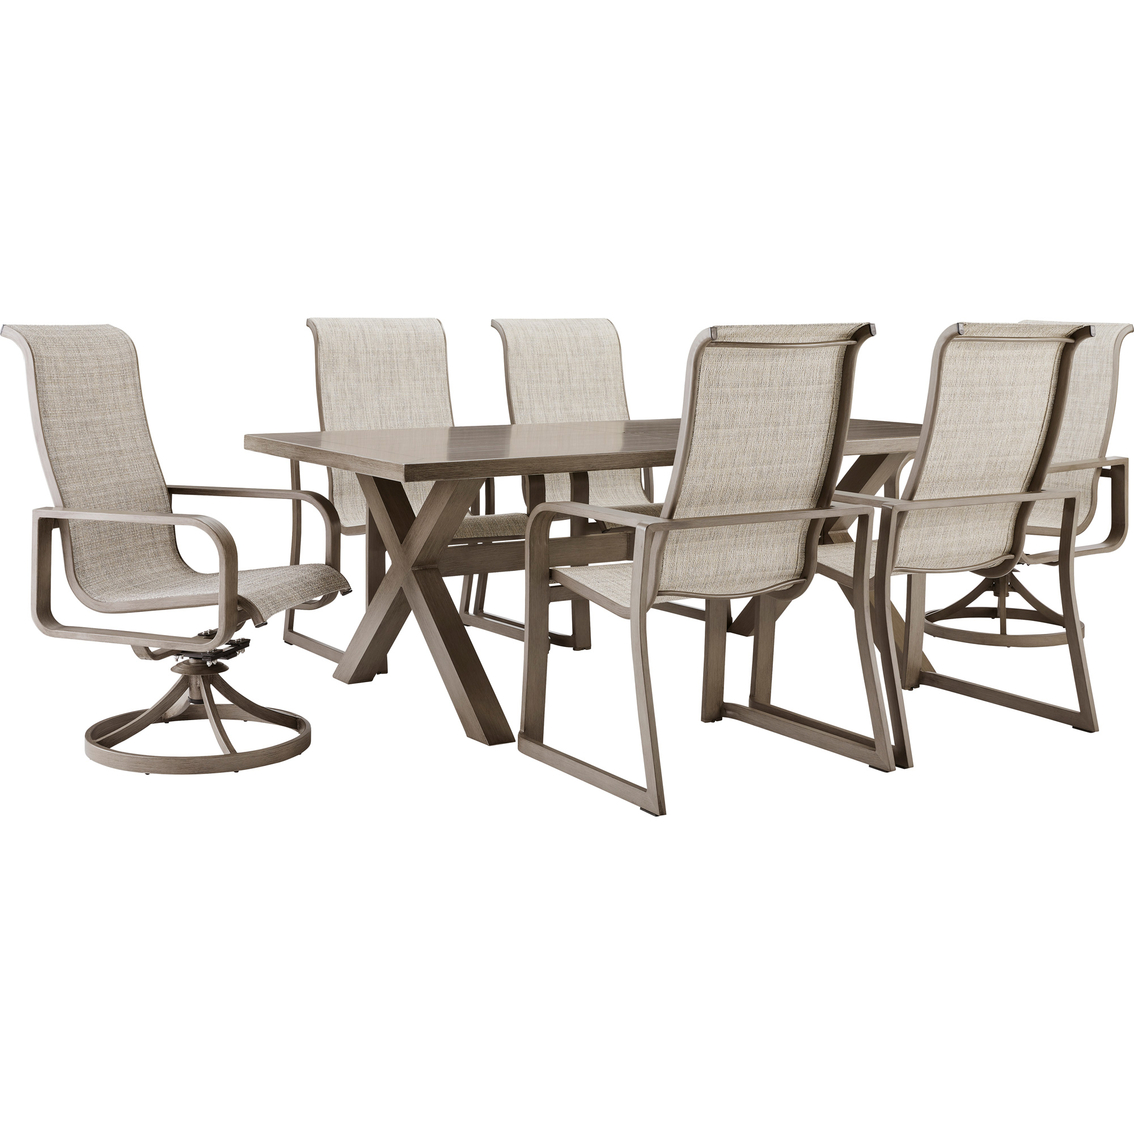 Signature Design by Ashley Beach Front 7pc Outdoor Dining Set with Sling Chairs